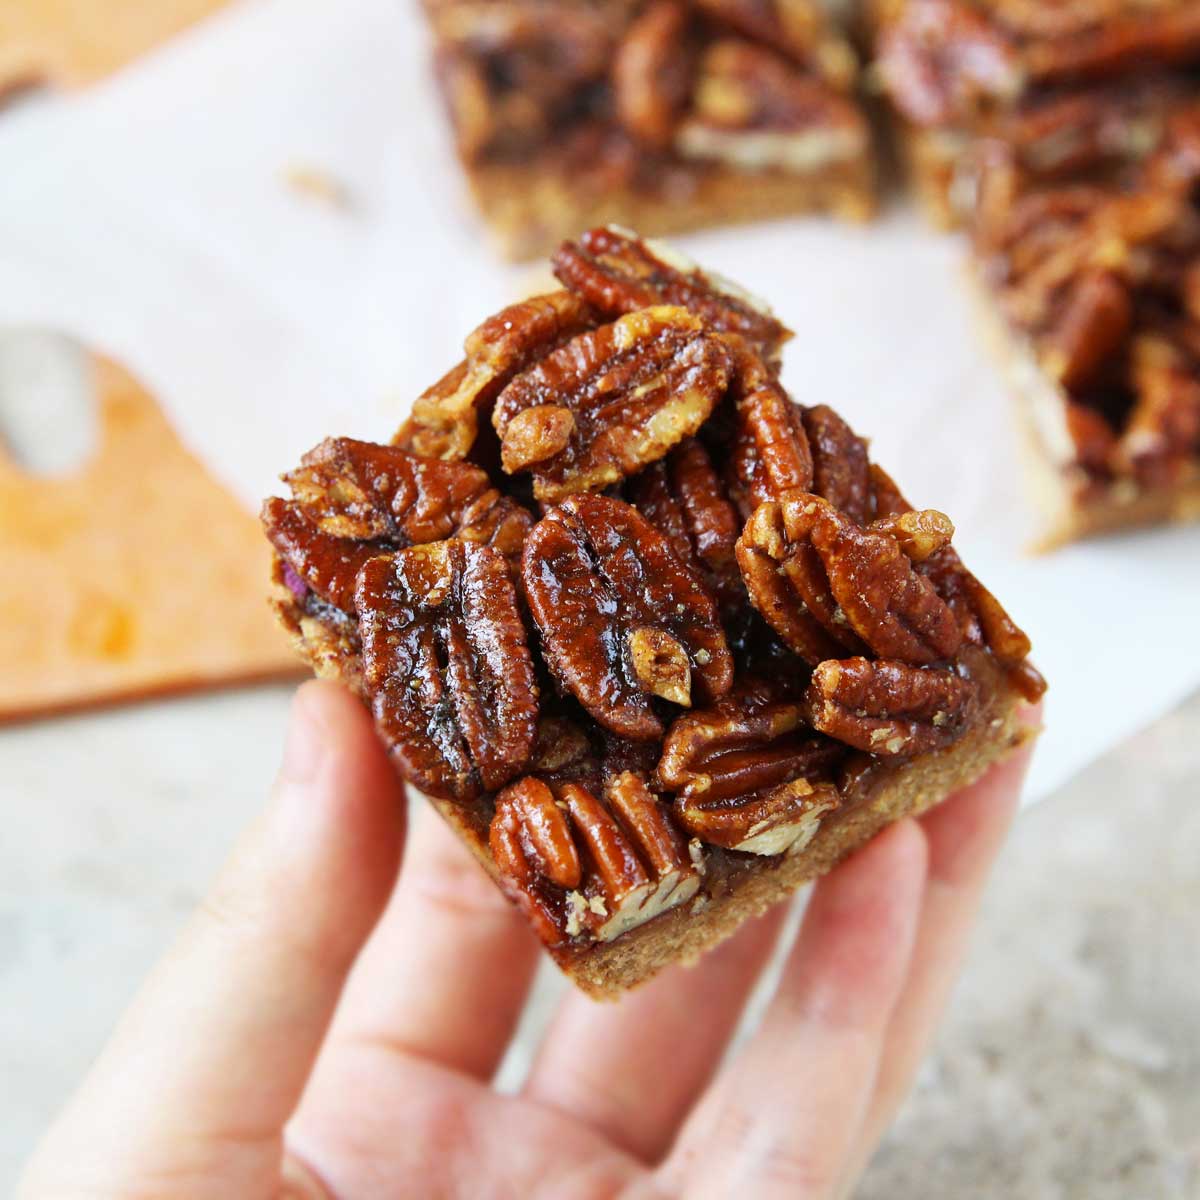 How to Make Vegan Pecan Pie Bars Using Canned Chickpeas - Chickpea Naan